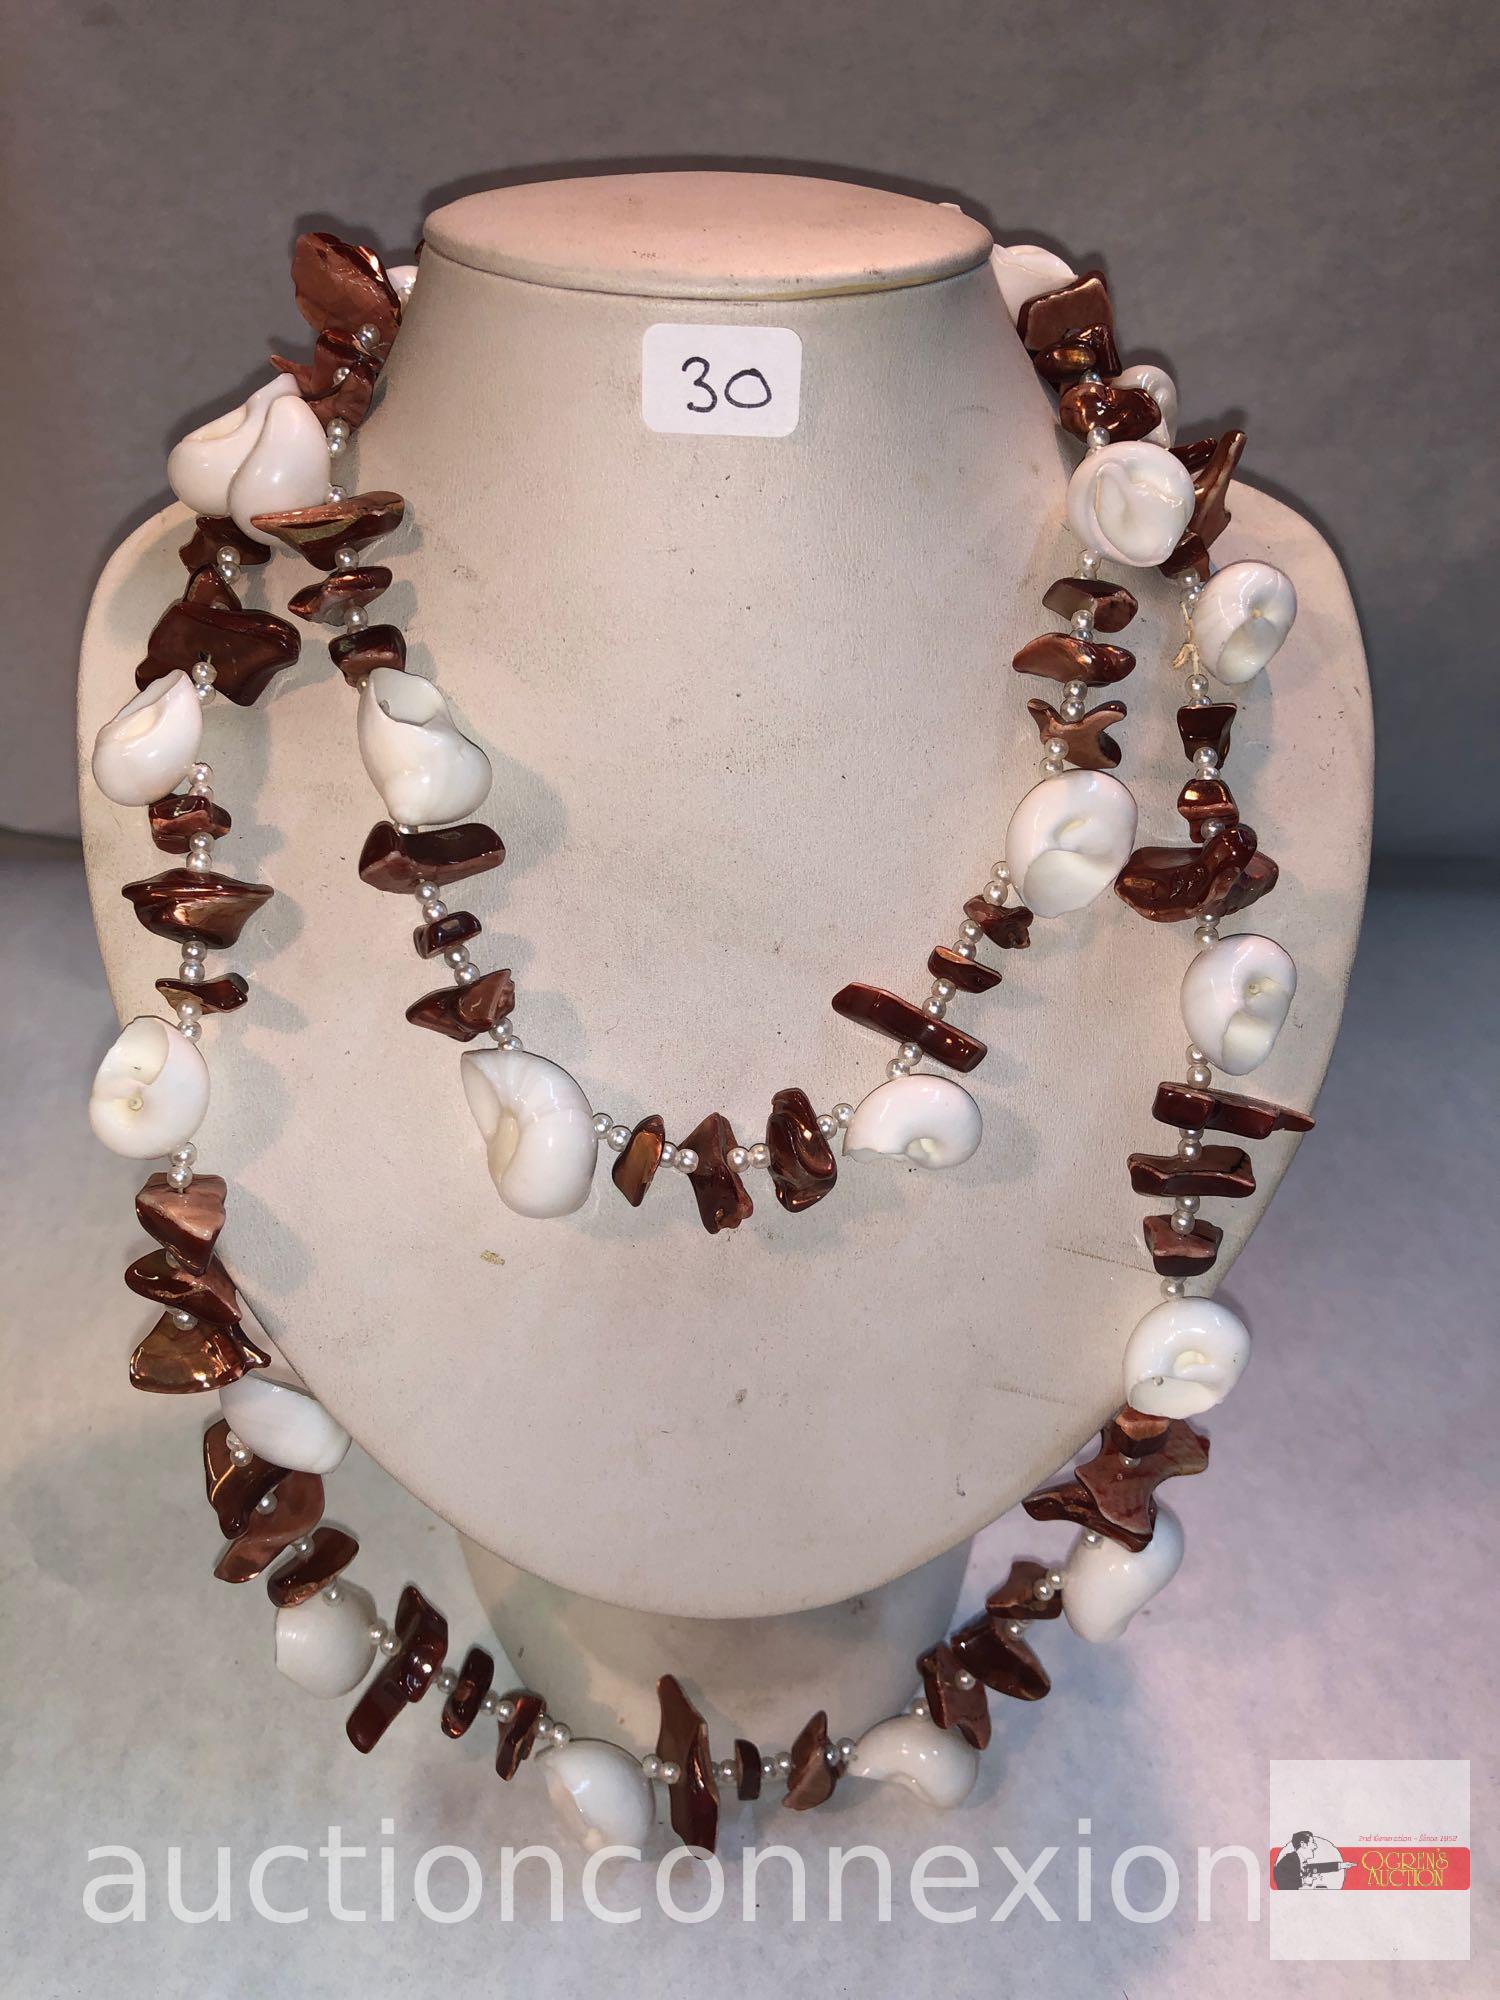 Jewelry - Necklace, lg. Long shell, semi precious stone, simulated pearls